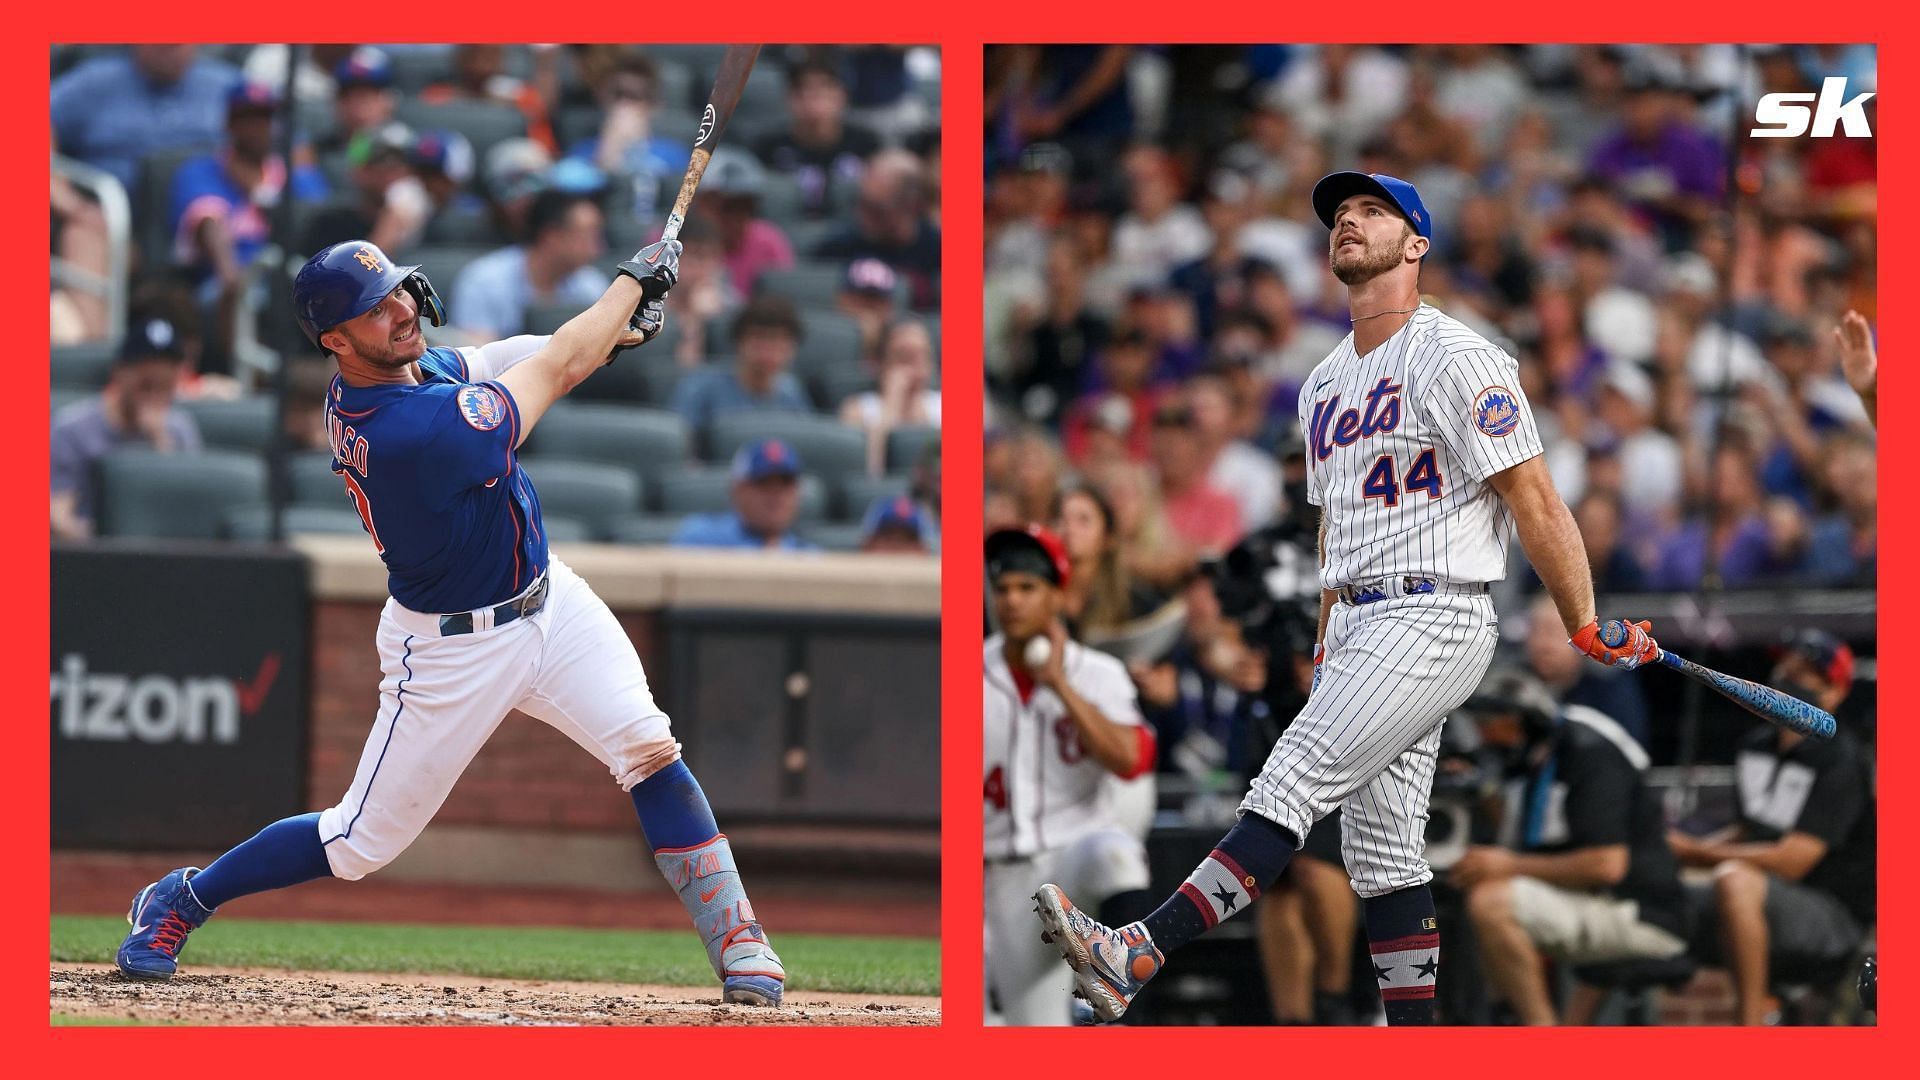 Pete Alonso of the New York Mets won the Home Run Derby